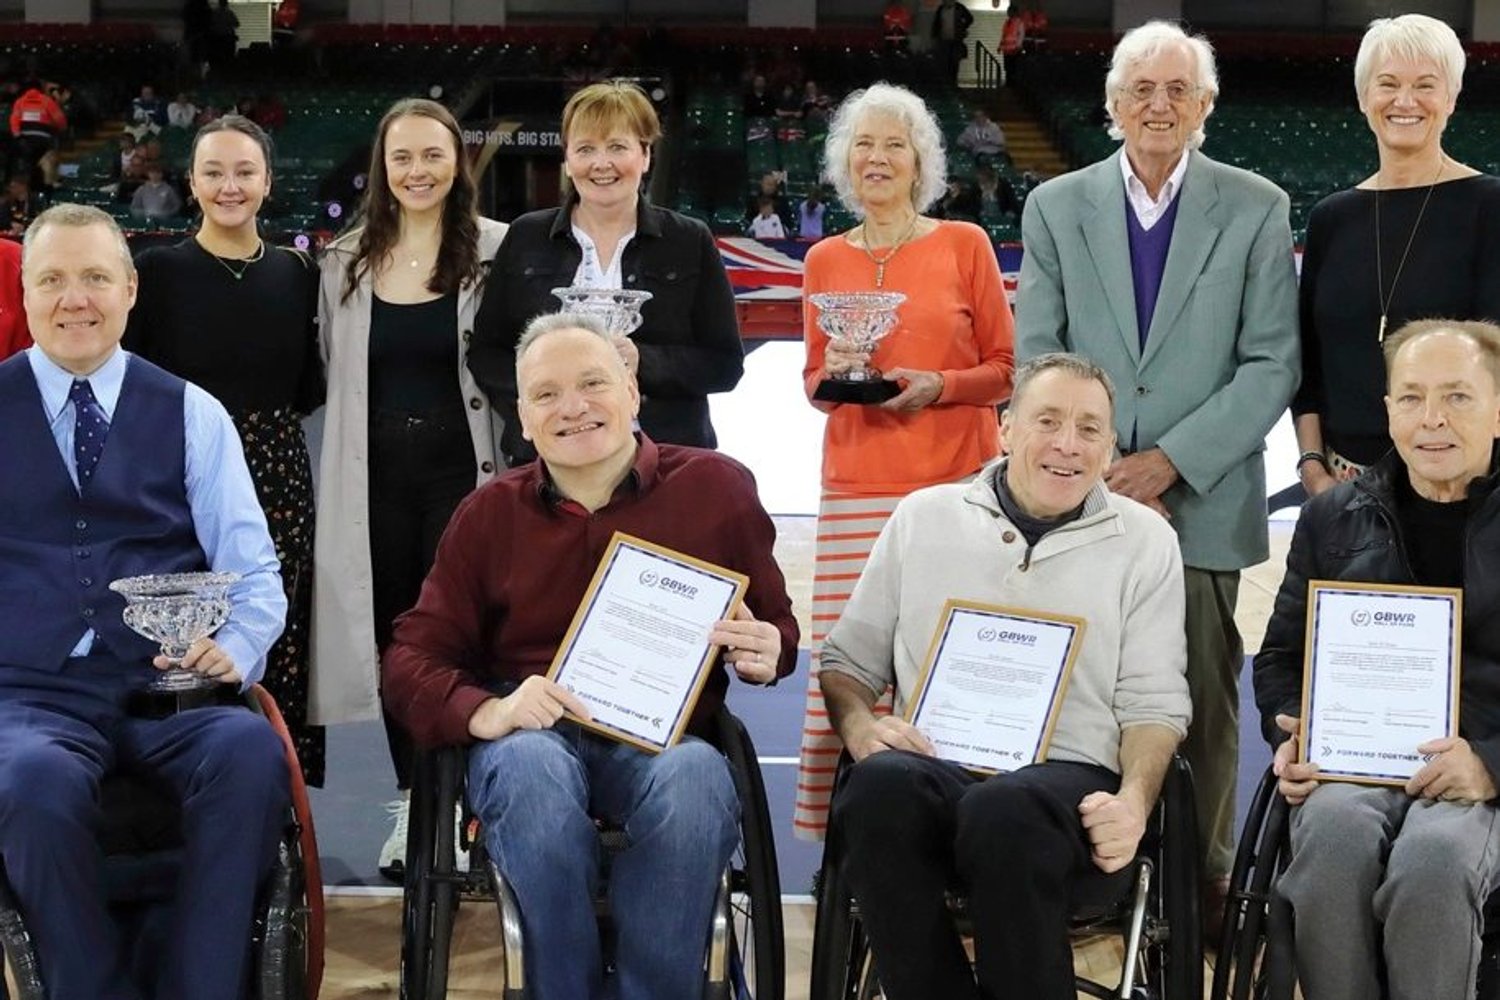 Rob Tarr is inducted into the GB Wheelchair Rugby Hall of Fame